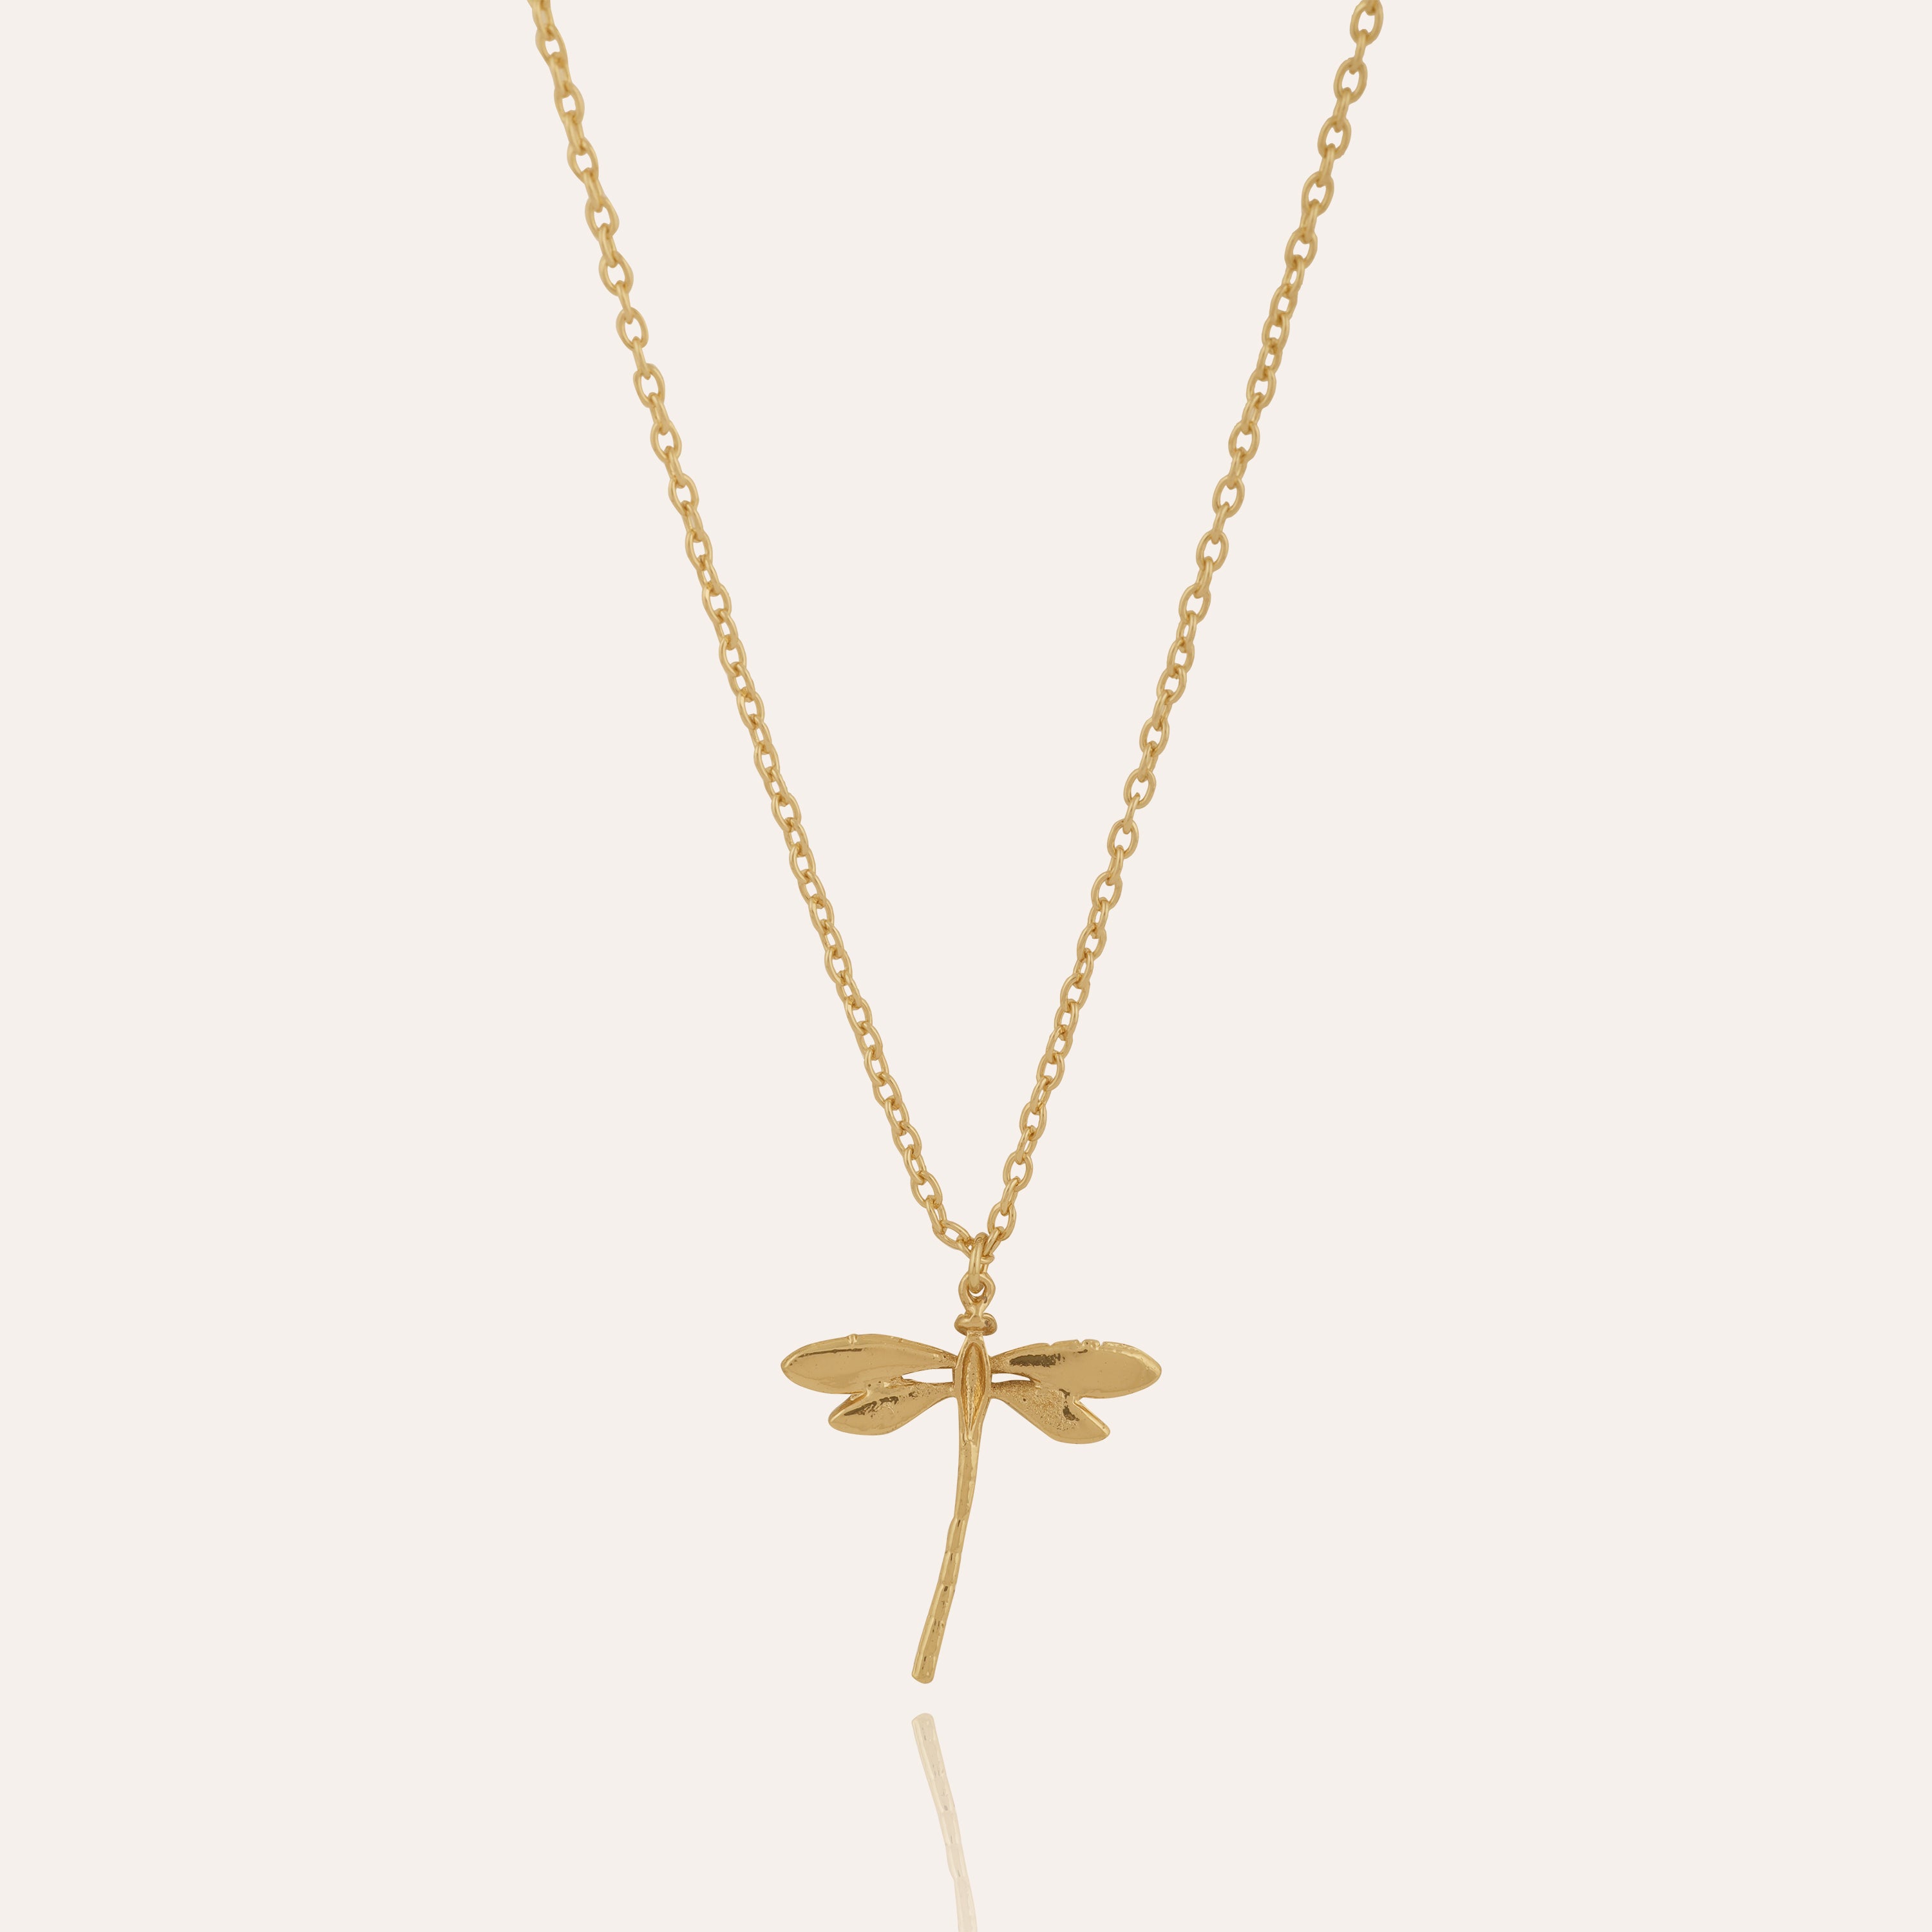 TFC Dragonfly Gold Plated Pendant Necklace-Enhance your elegance with our collection of gold-plated necklaces for women. Choose from stunning pendant necklaces, chic choker necklaces, and trendy layered necklaces. Our sleek and dainty designs are both affordable and anti-tarnish, ensuring lasting beauty. Enjoy the cheapest fashion jewellery, lightweight and stylish- only at The Fun Company.